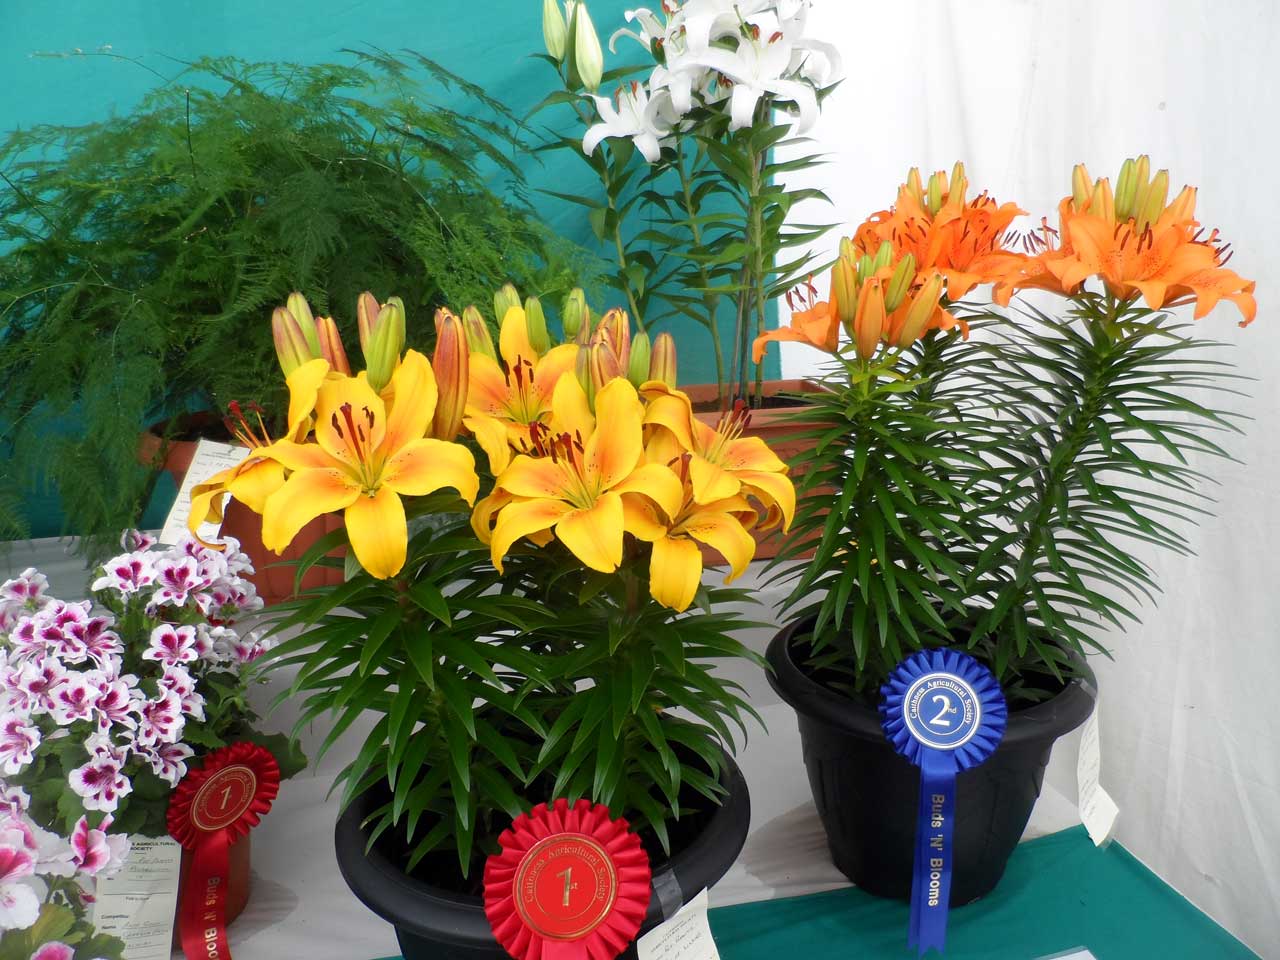 Photo: Caithness County Show 2014 - Friday Evening Preview